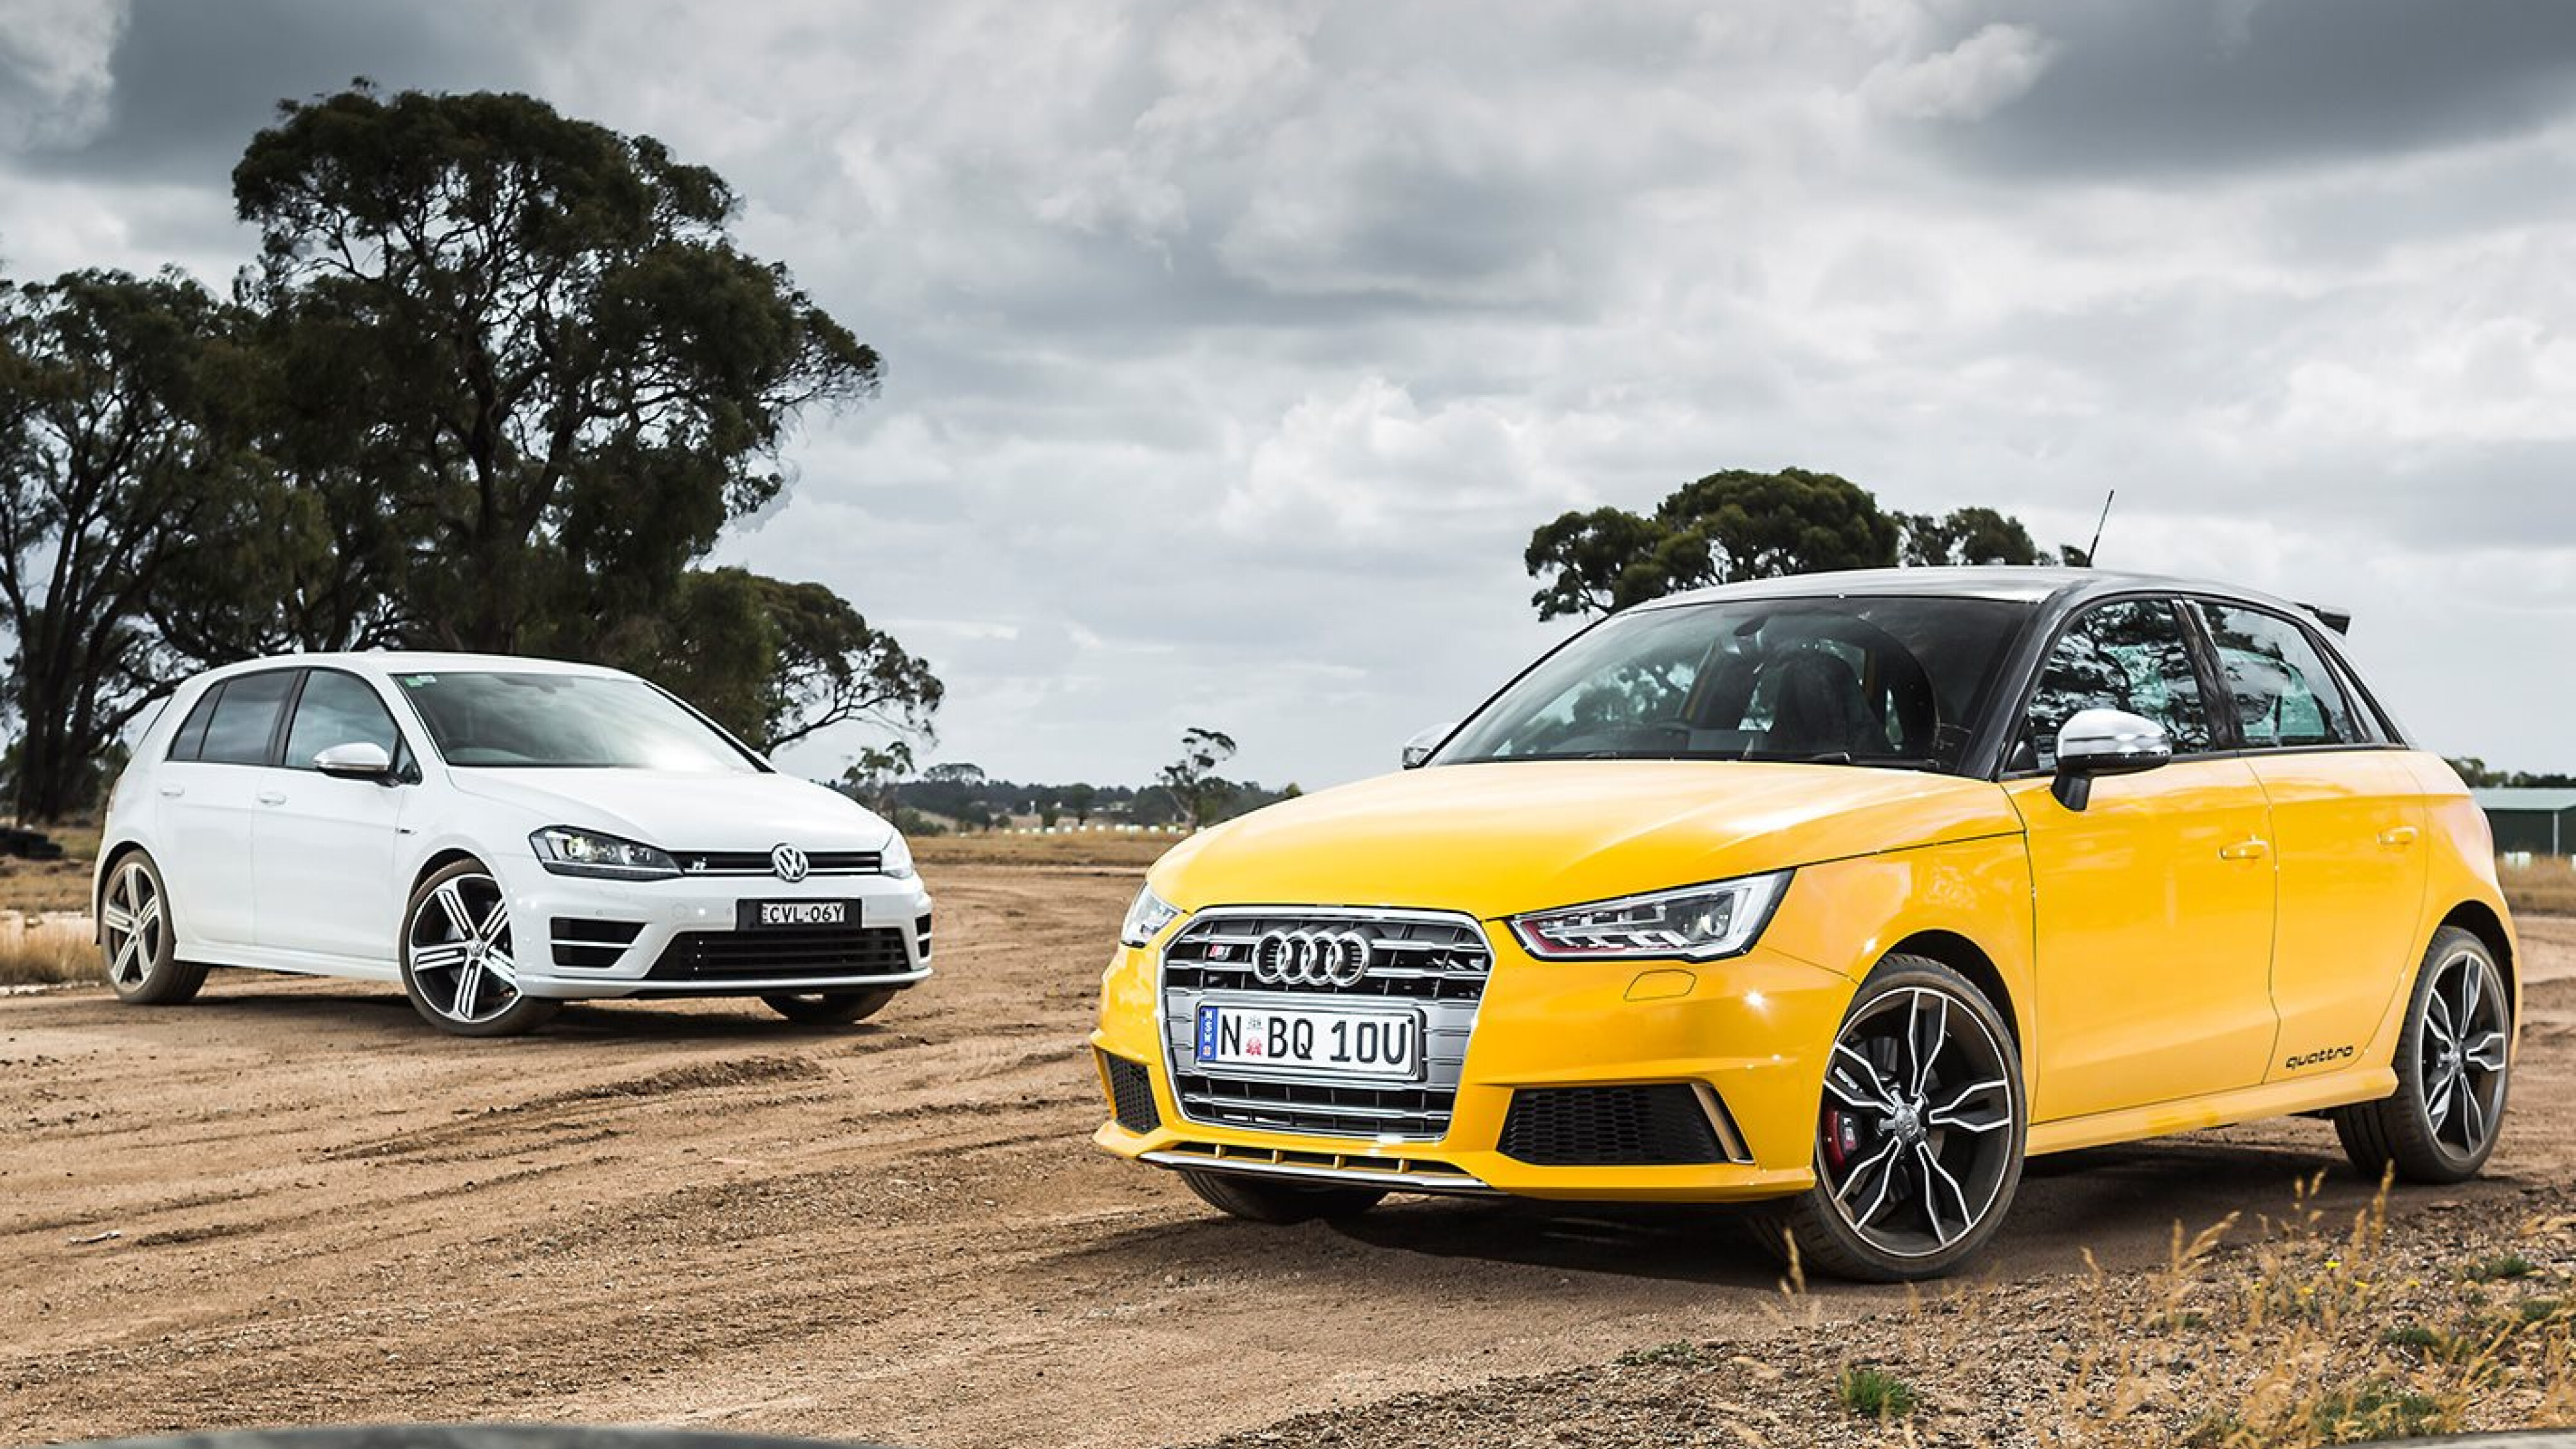 Audi S1: A Fast Hatchback You're Not Going to See in the U.S.